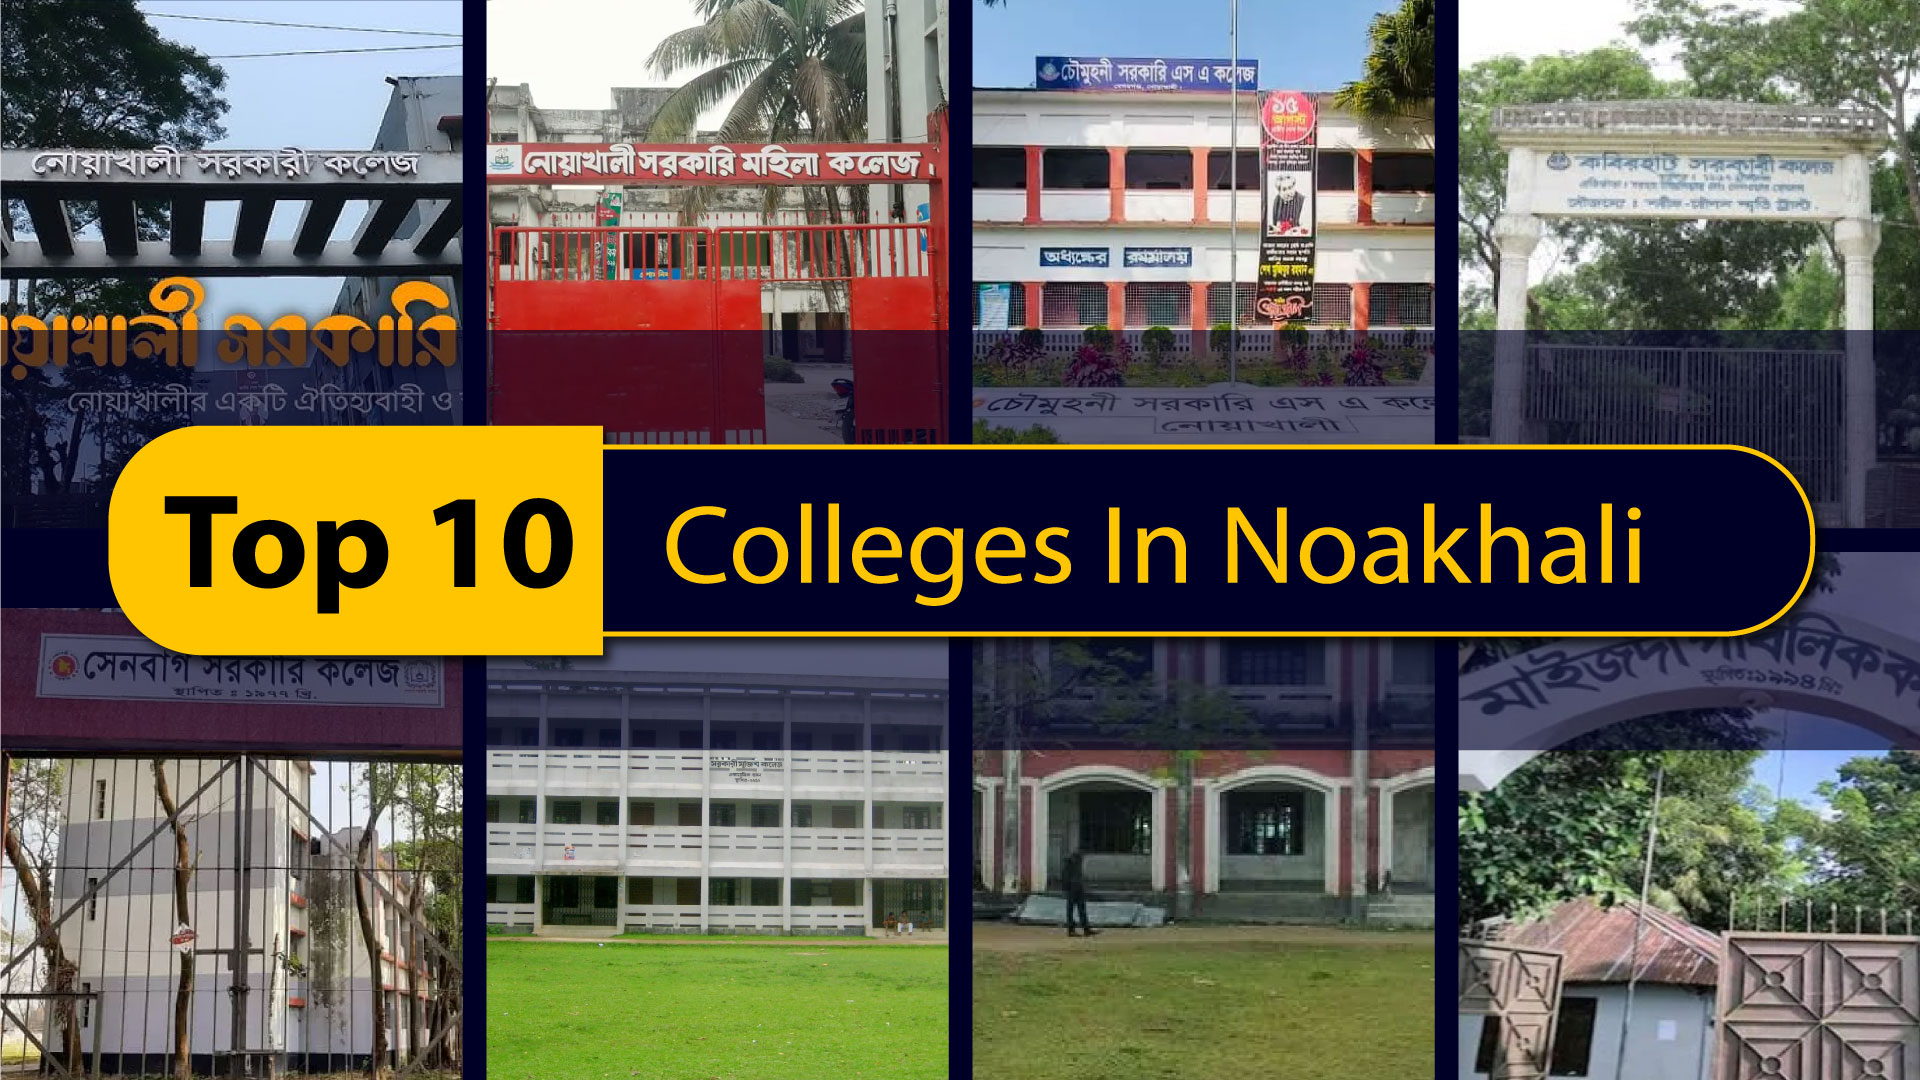 Government College in Dhaka